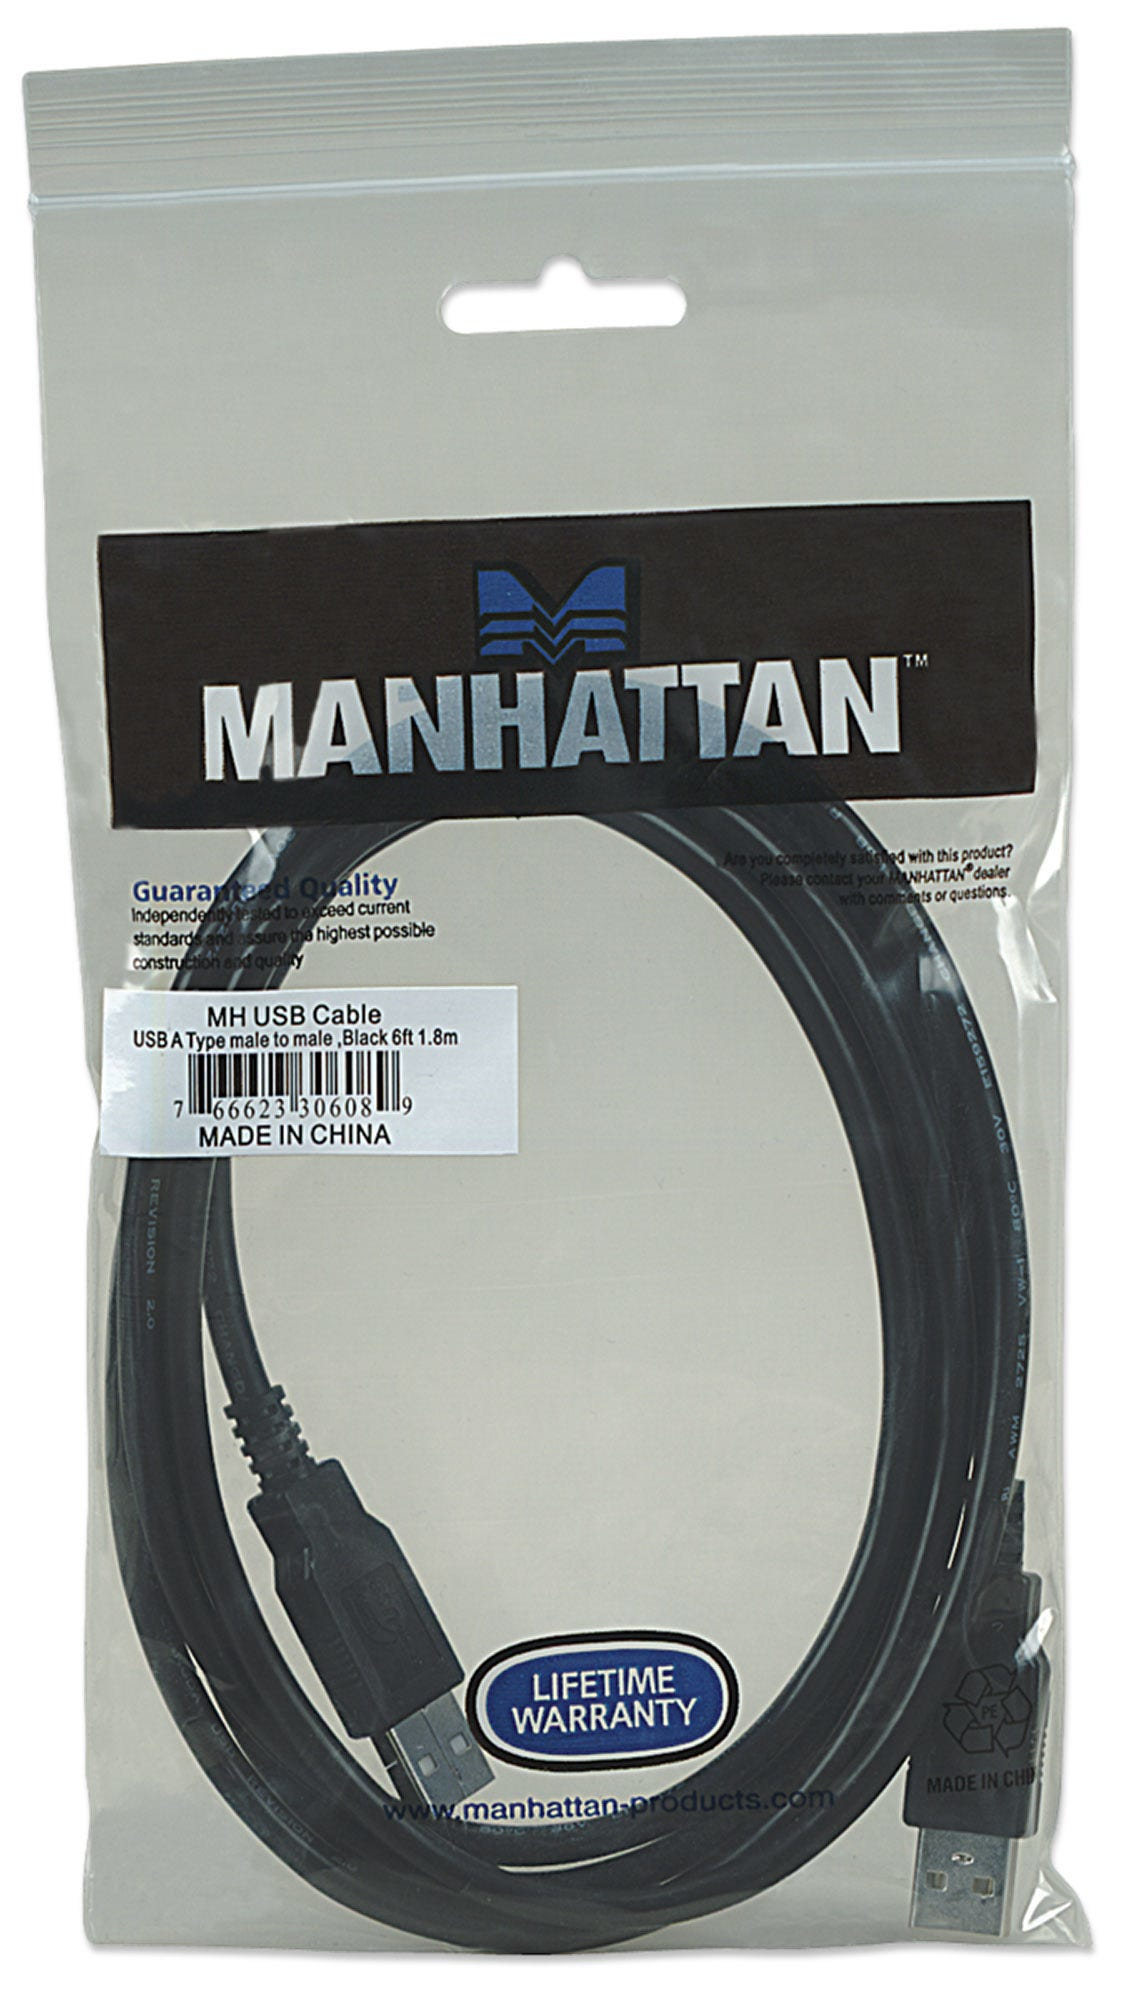 Manhattan USB-A to USB-A Cable, 1.8m, Male to Male, 480 Mbps (USB 2.0), Black, Polybag